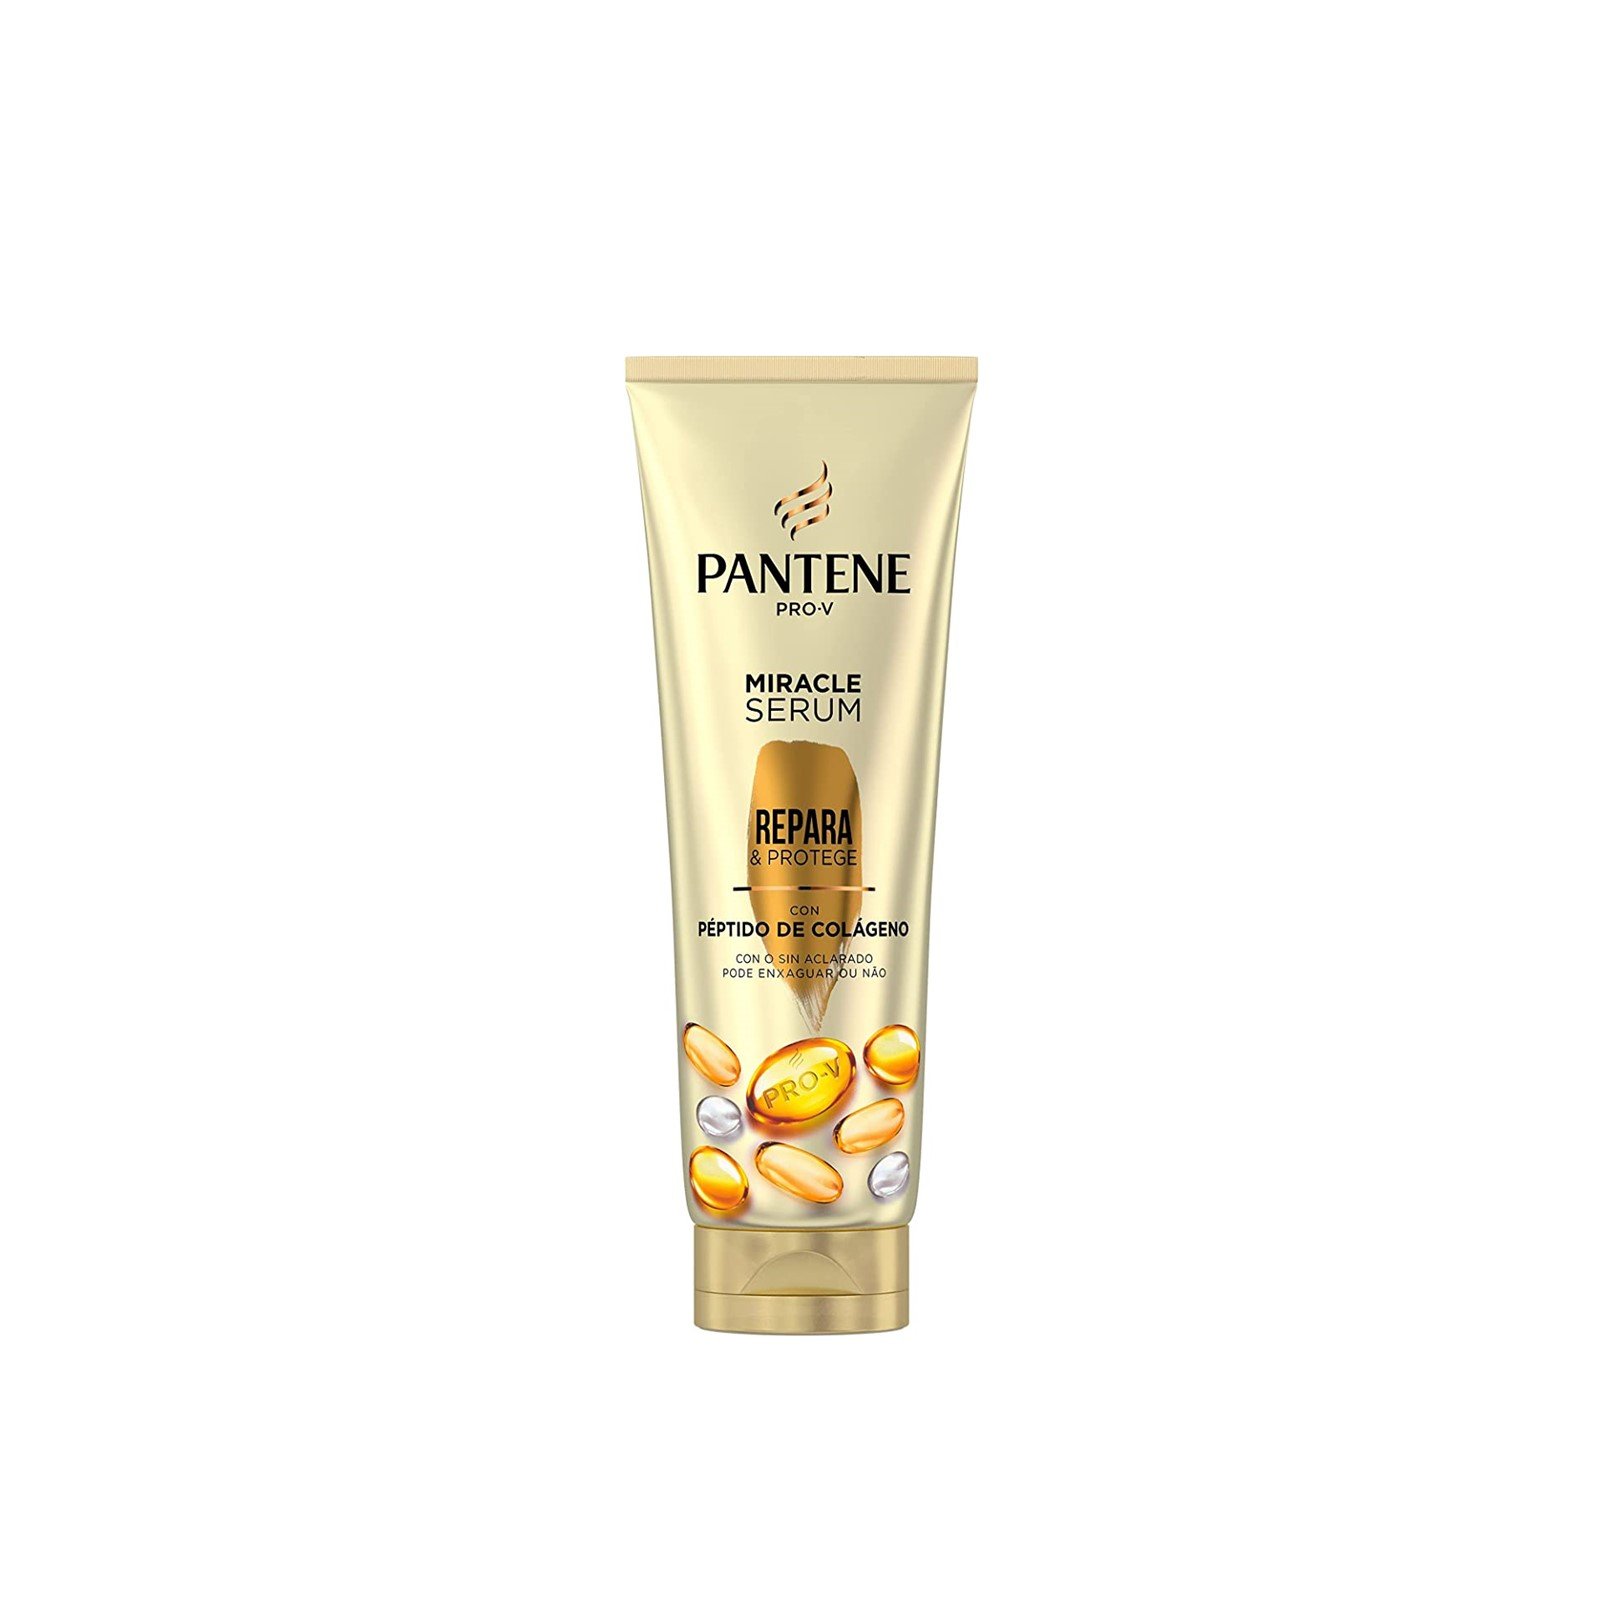 Pantene Hydrating Glow with Baobab Essence Thirsty Ends Milk To Water Hair  Serum 32 Fl Oz 2508 Fl Oz  Imported Products from USA  iBhejo